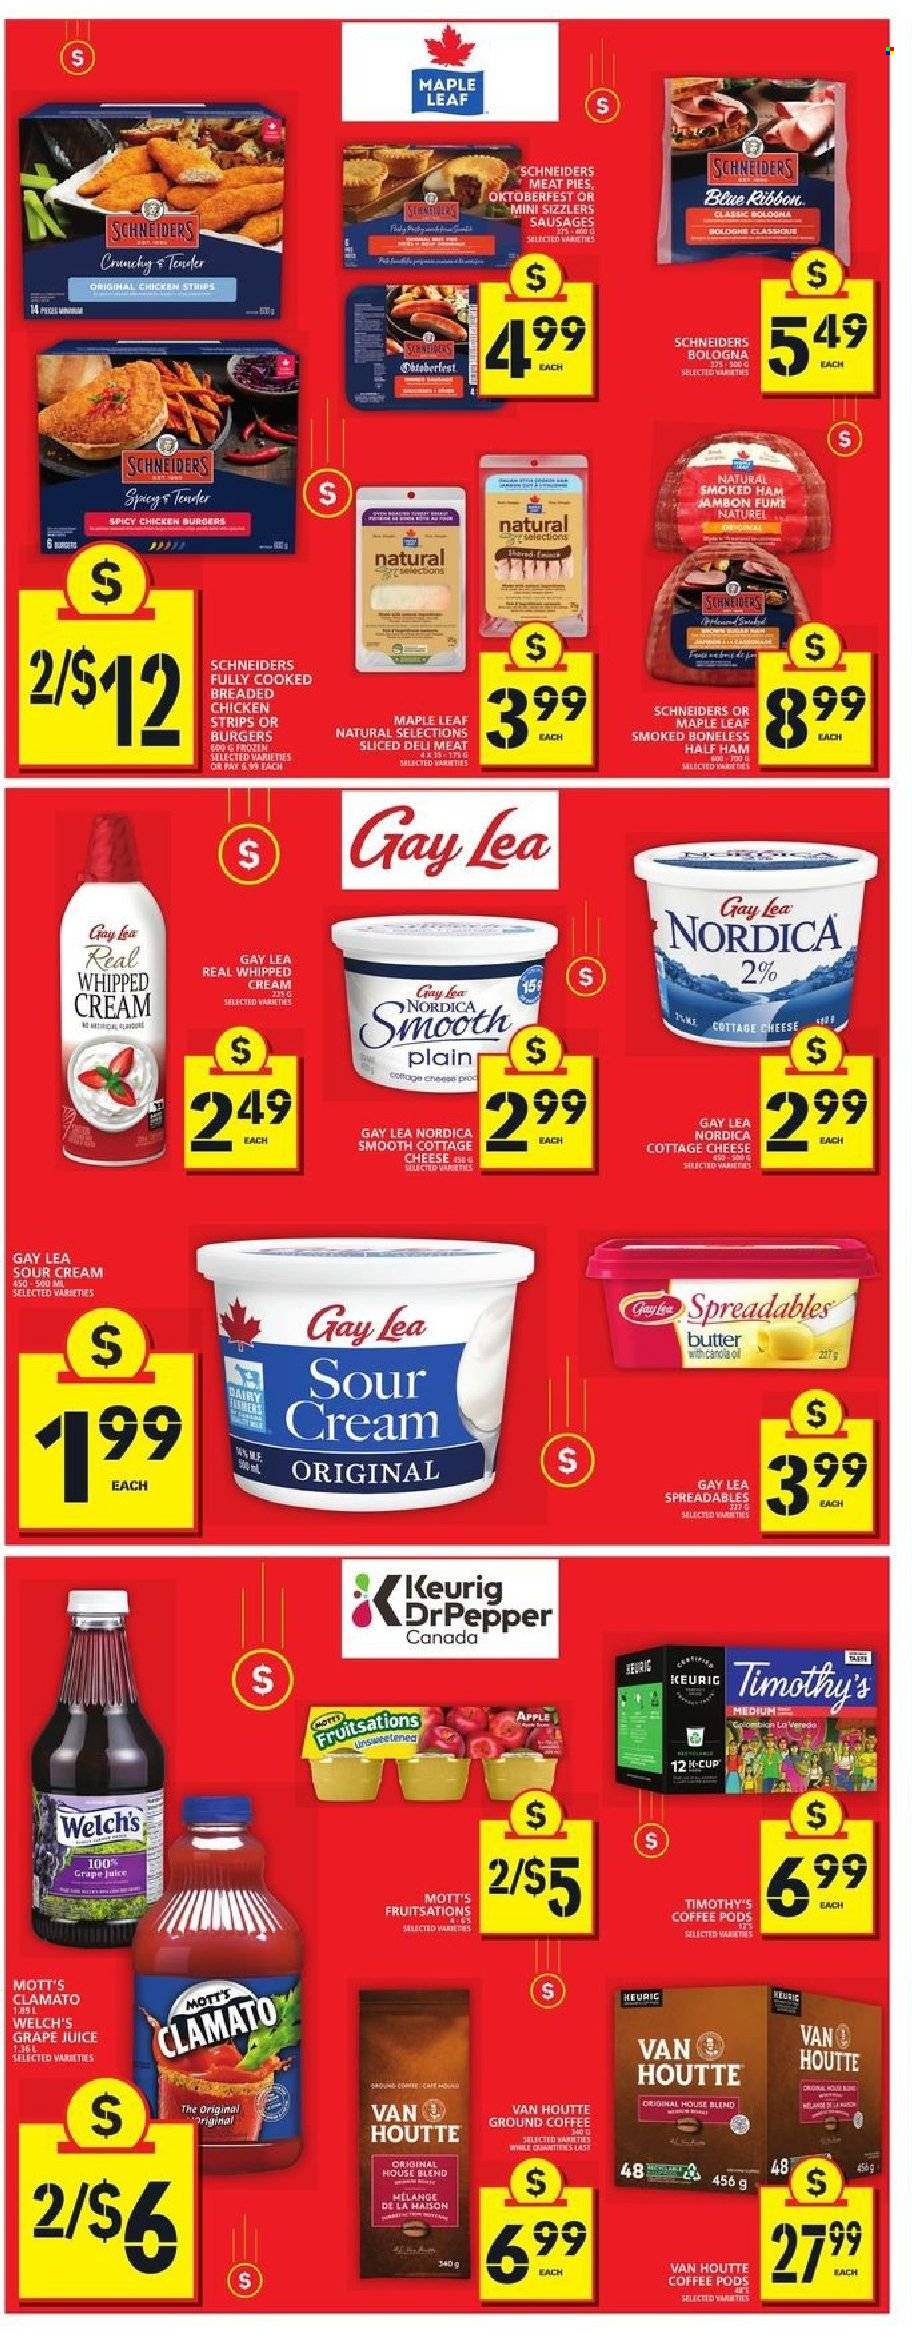 thumbnail - Food Basics Flyer - September 16, 2021 - September 22, 2021 - Sales products - Blue Ribbon, Welch's, Mott's, fried chicken, half ham, ham, smoked ham, bologna sausage, sausage, cottage cheese, cheese, butter, sour cream, whipped cream, strips, chicken strips, juice, Clamato, coffee pods, ground coffee, coffee capsules, K-Cups, Keurig. Page 2.